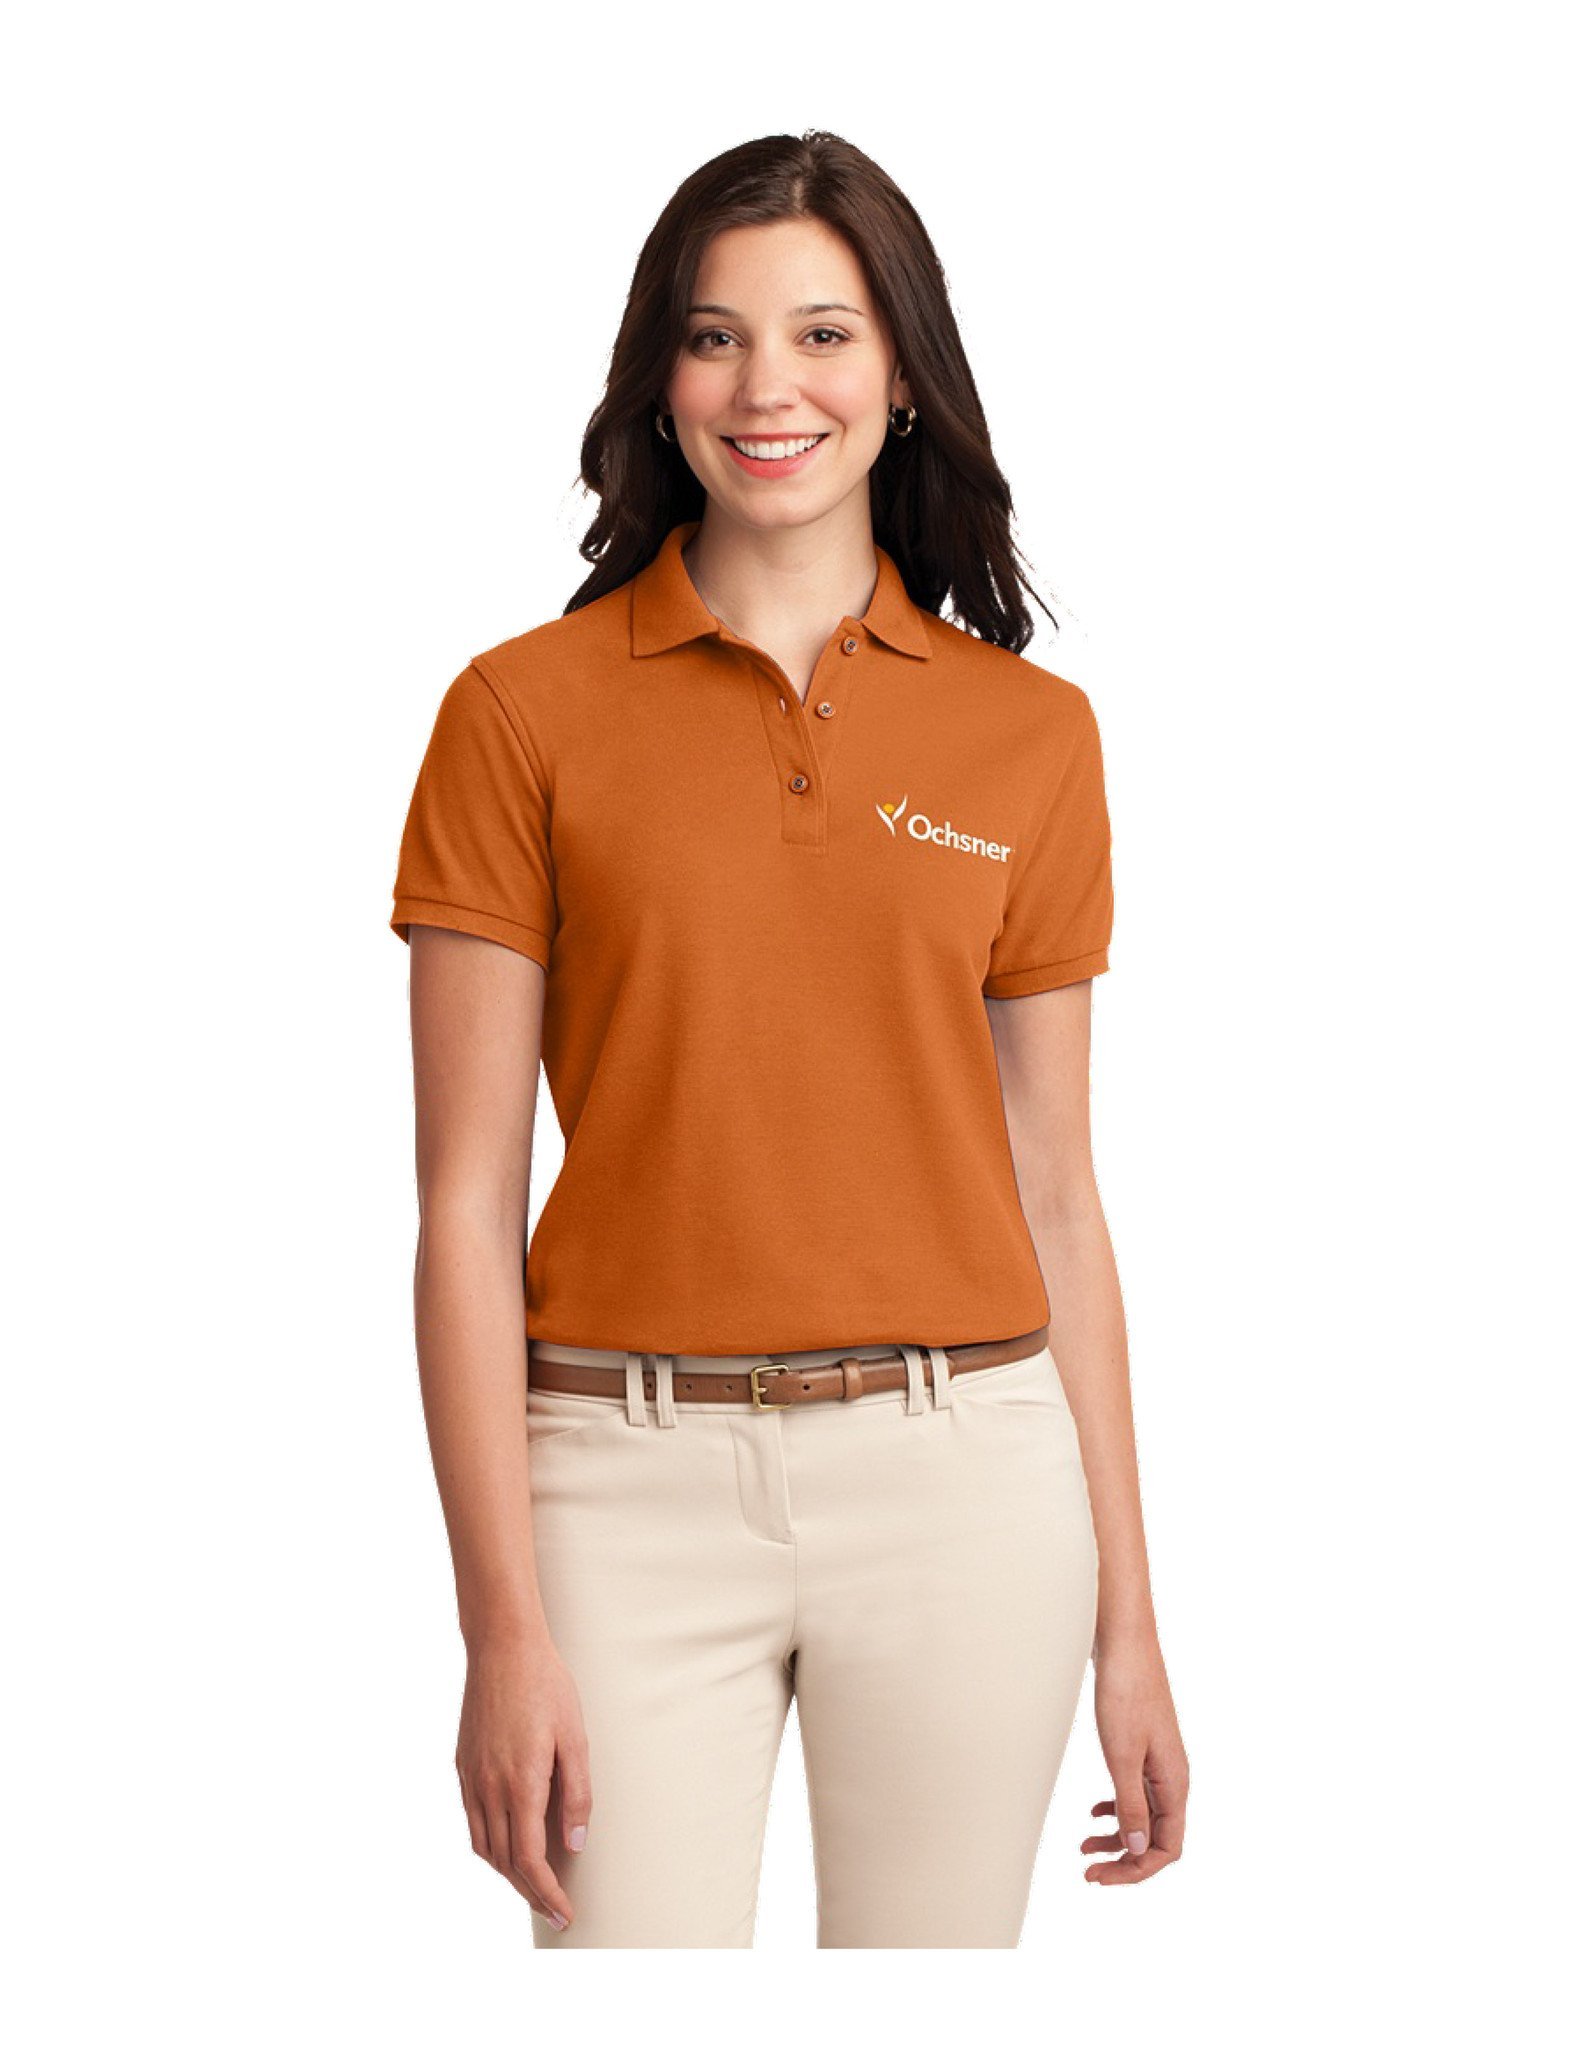 Port Authority Women's Silk Touch Polo, Burnt Orange, large image number 1